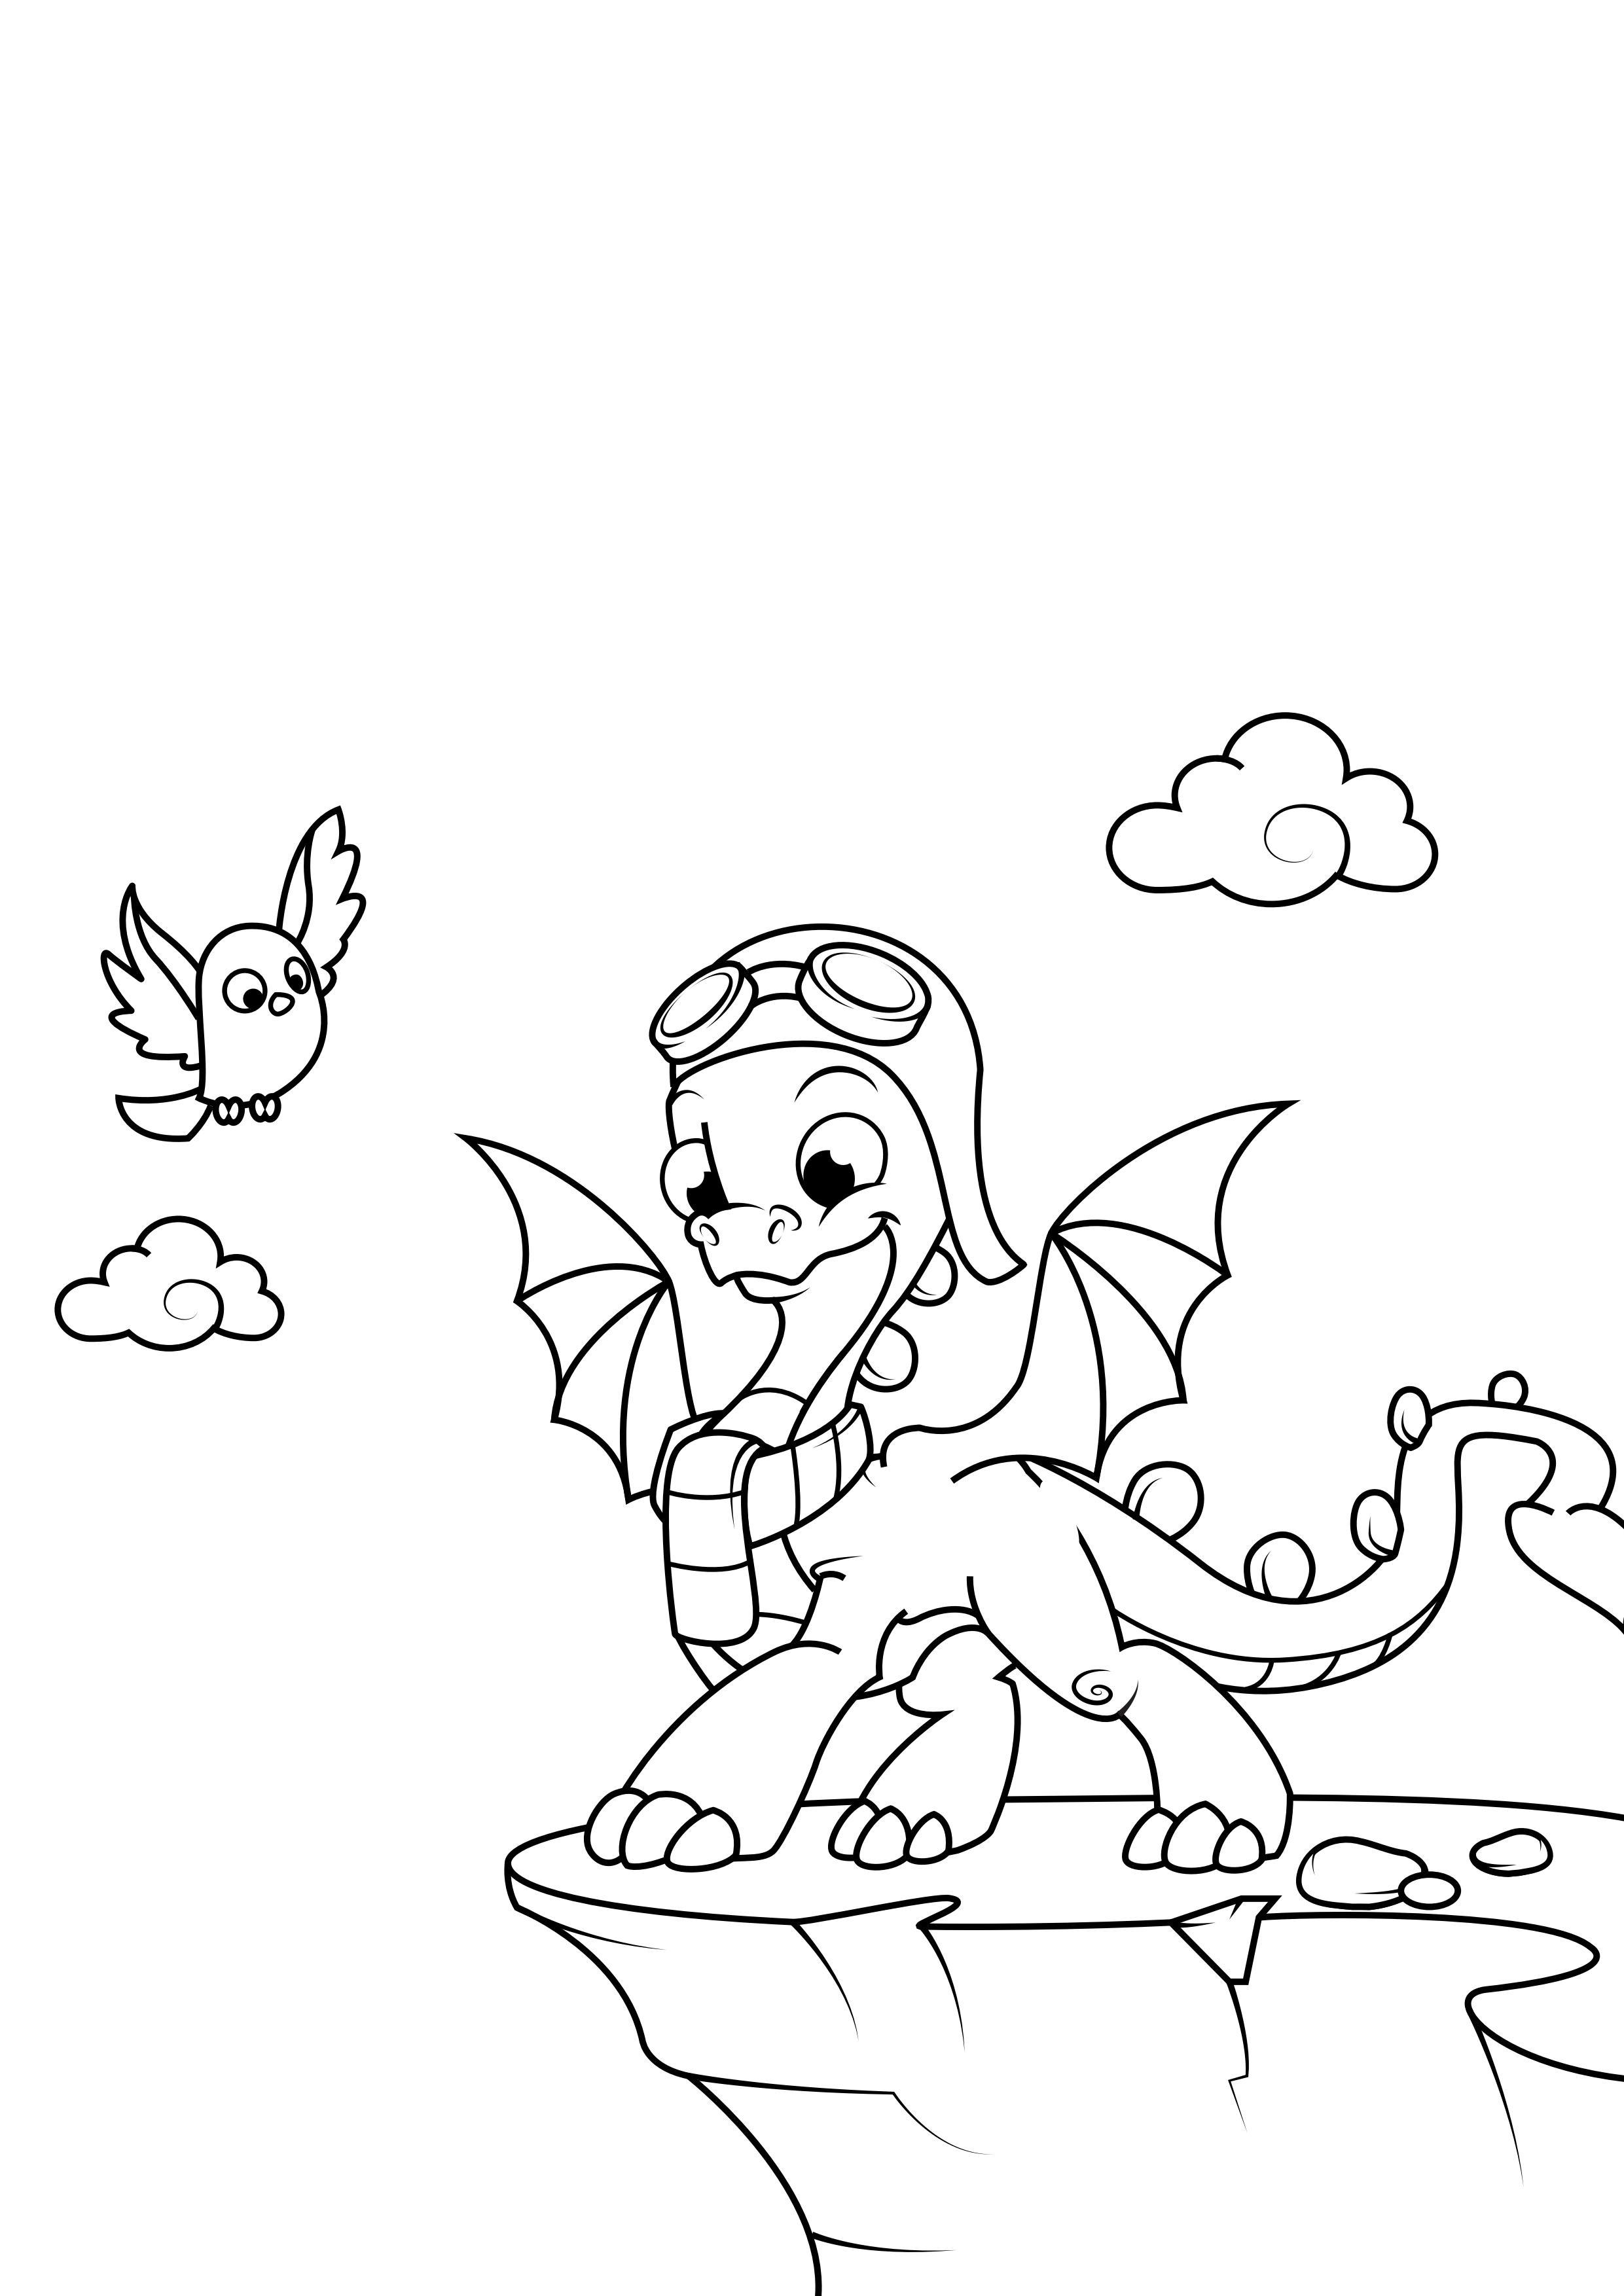 Coloring page dragon is going to fly